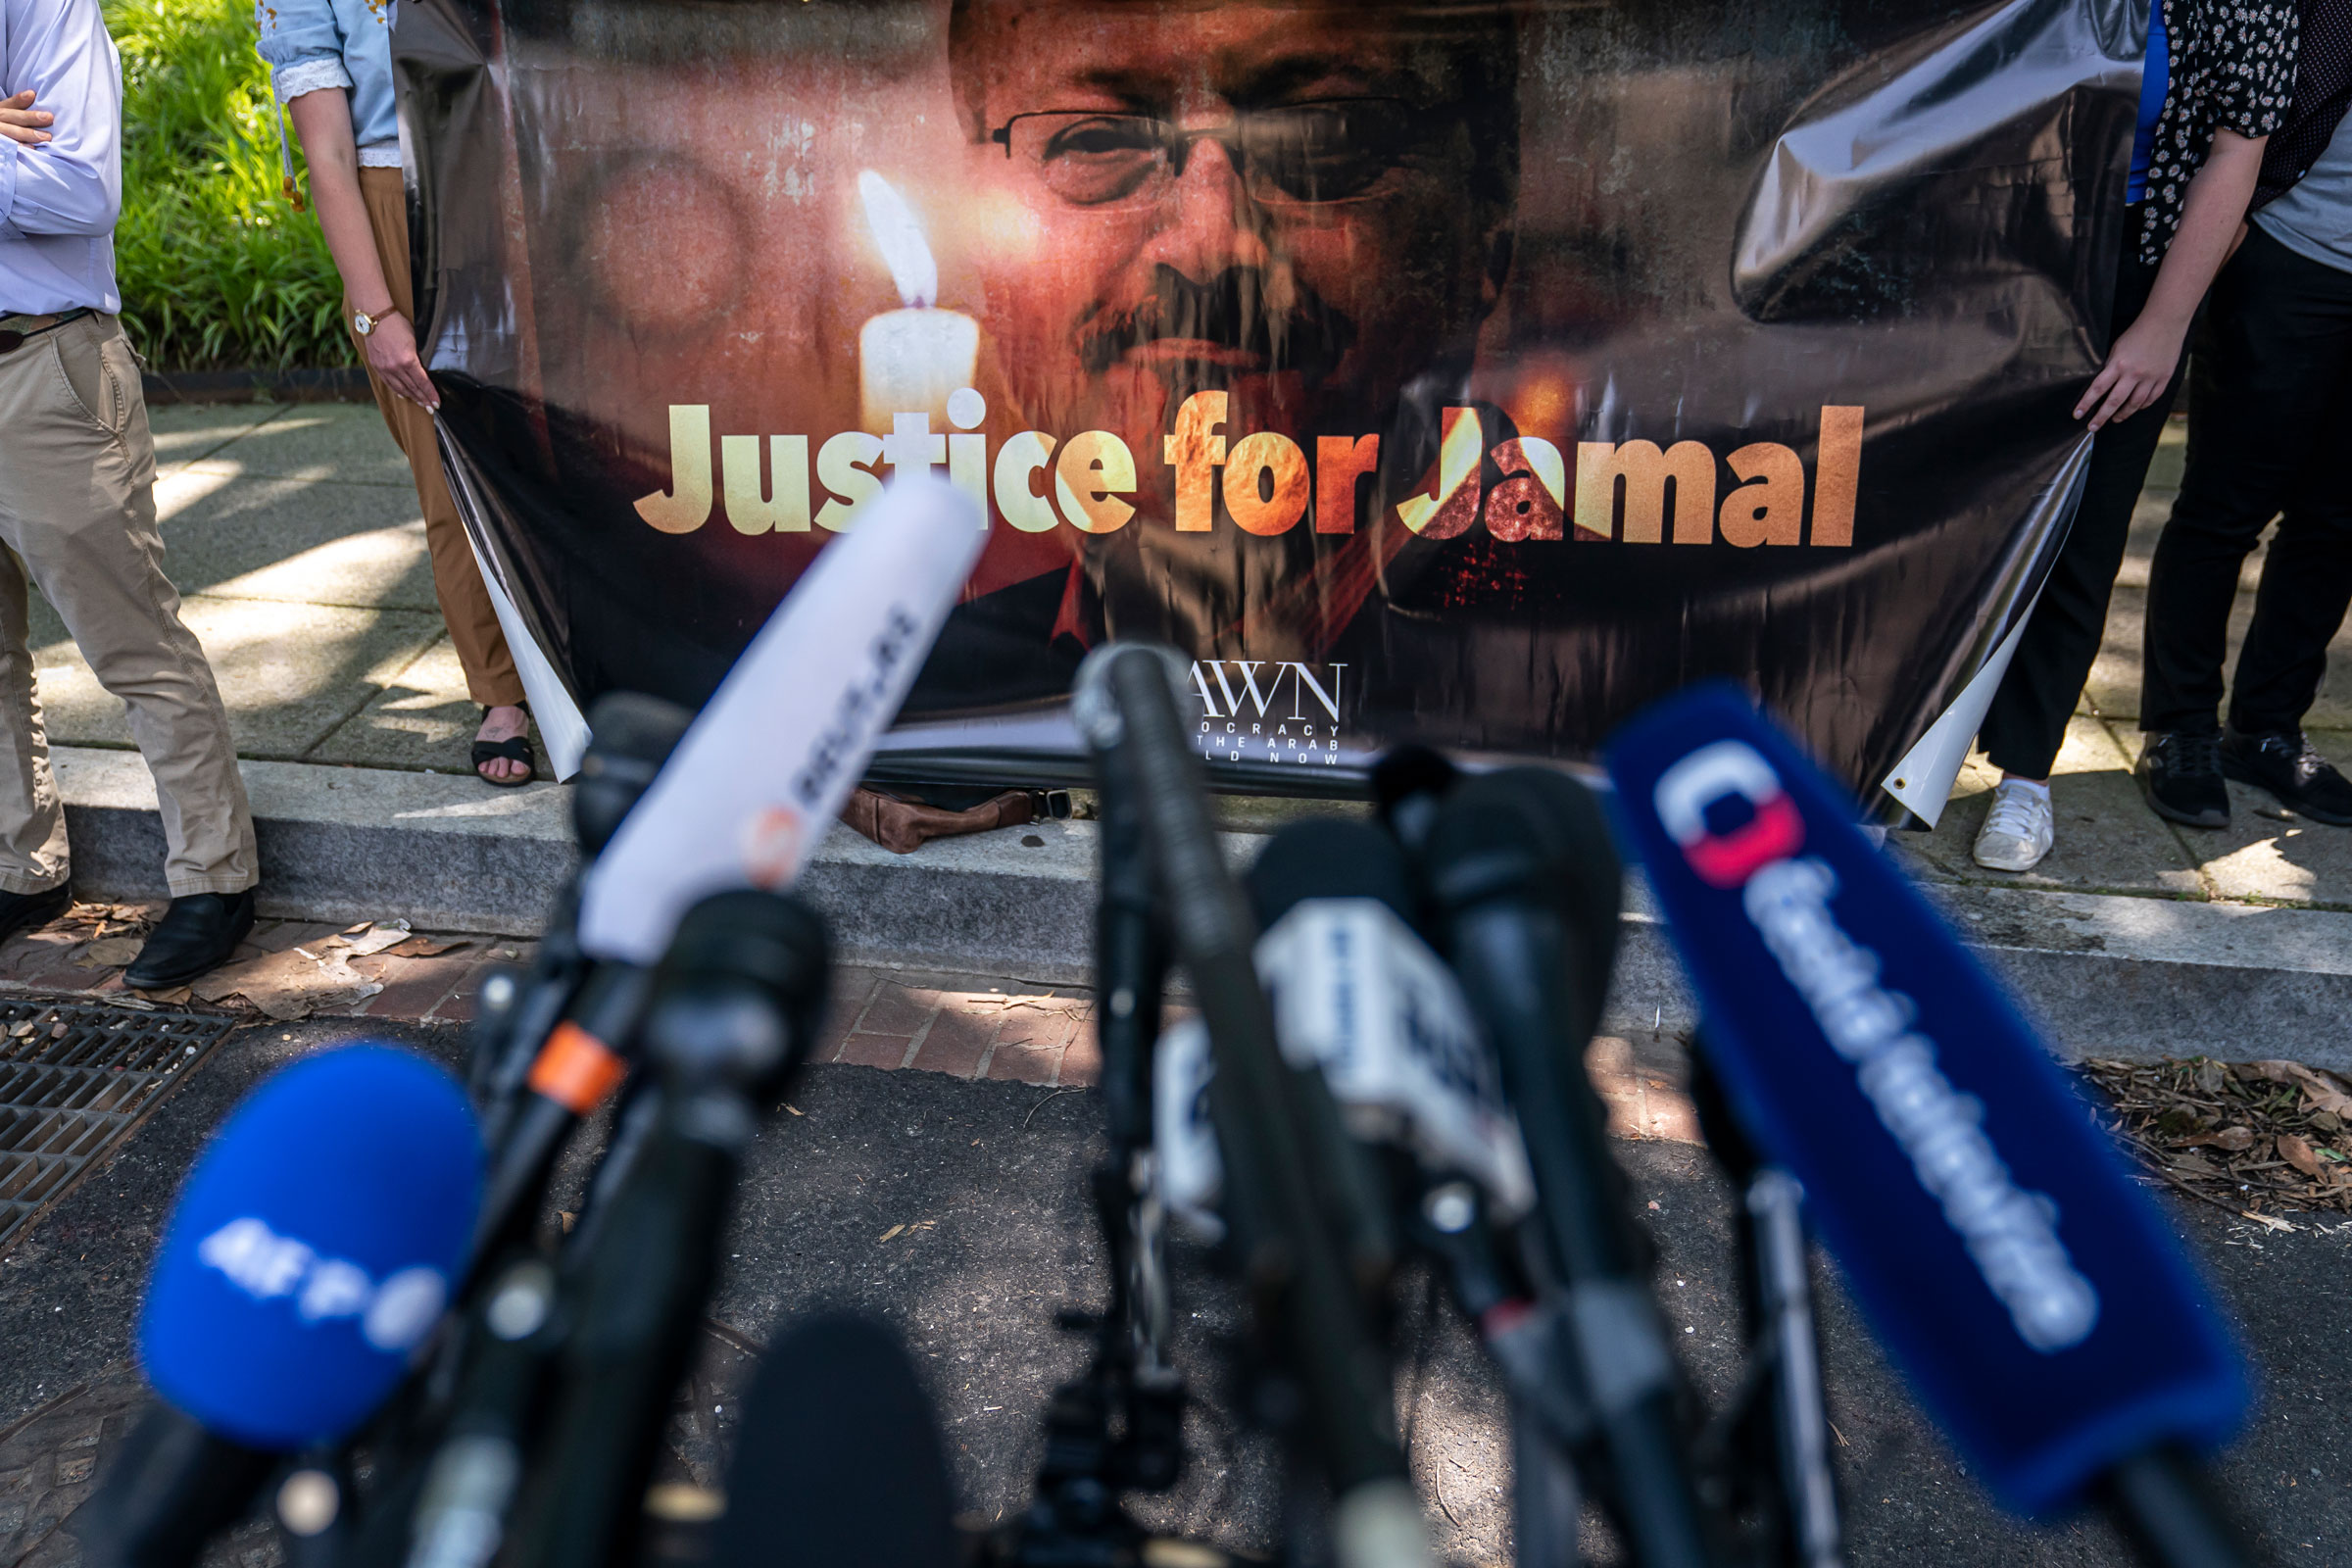 Human rights activists hold a banner calling for justice for the late Jamal Khashoggi